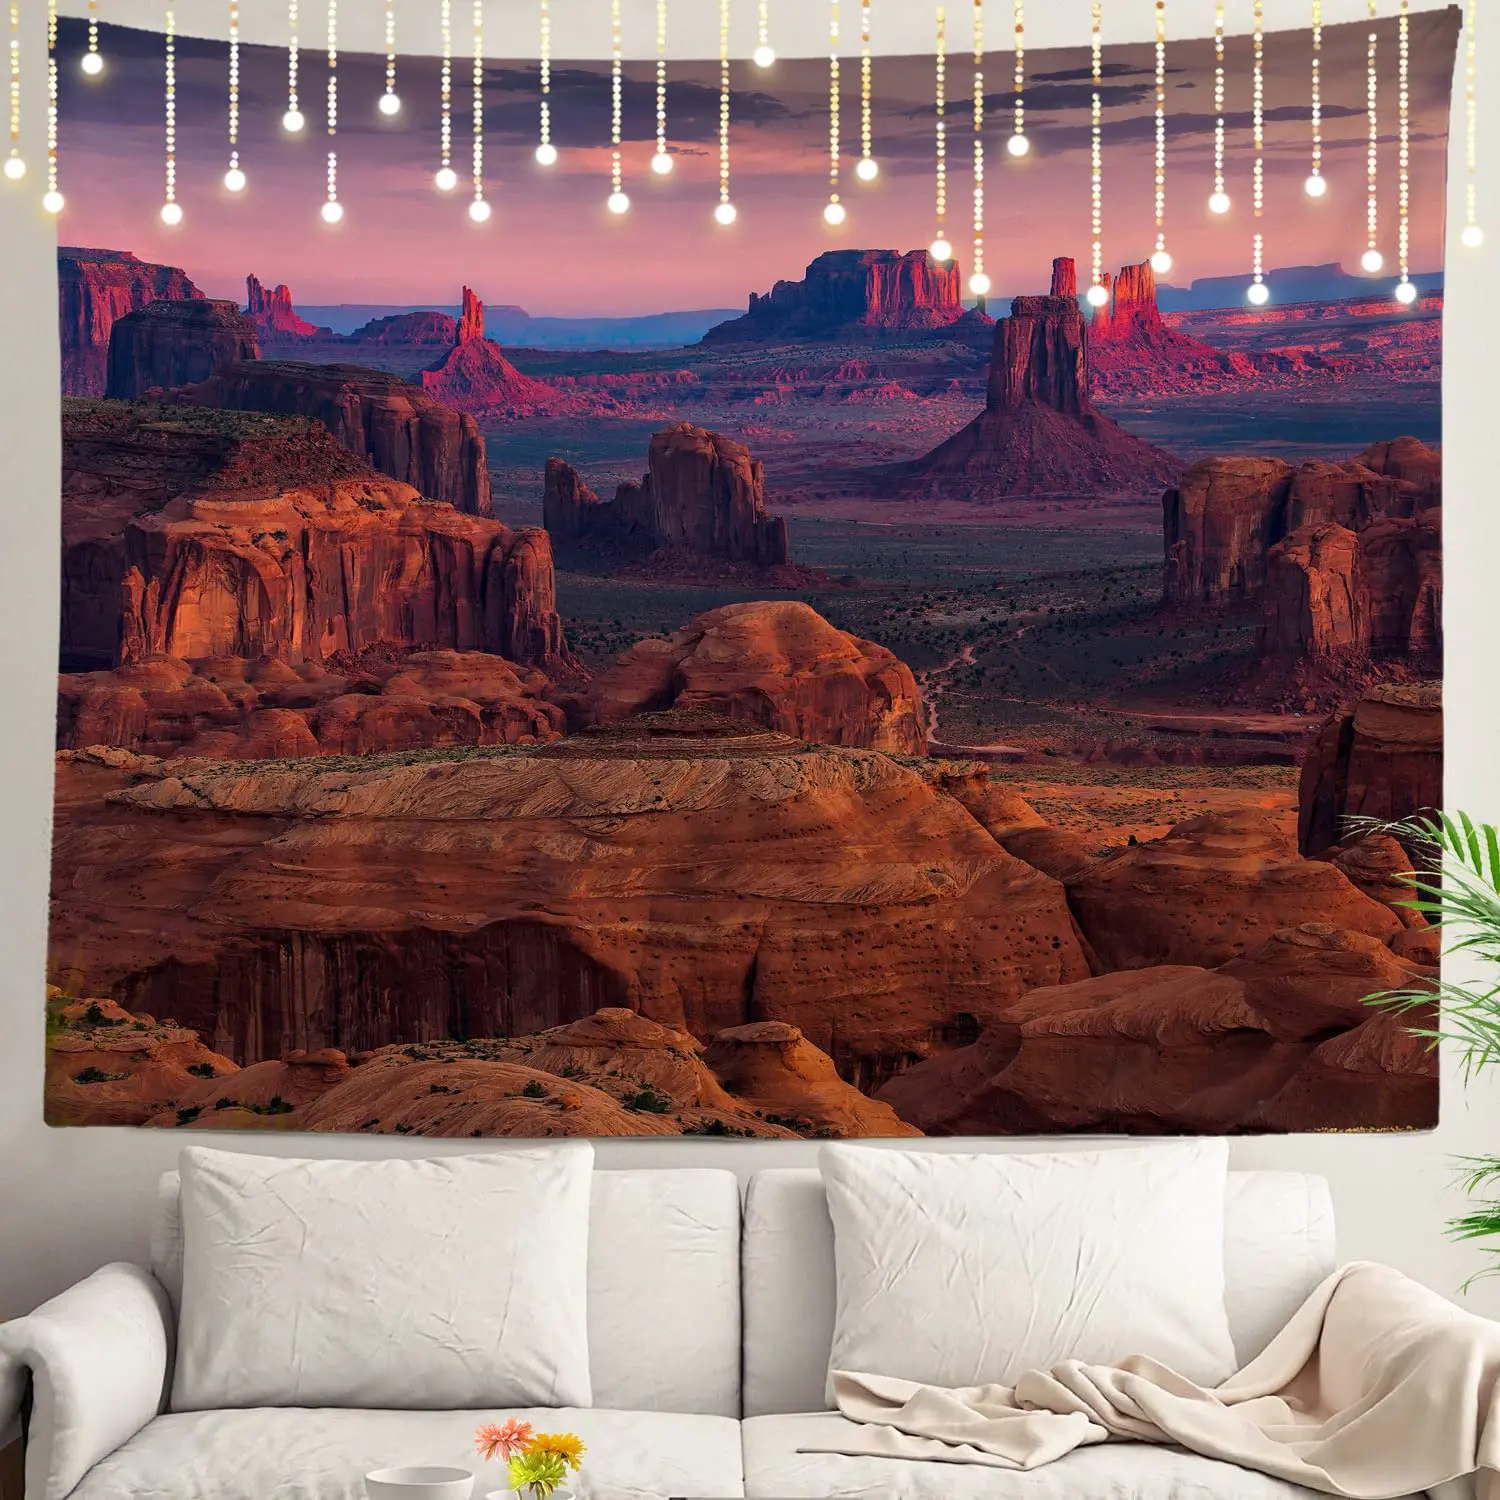 

Sunrise Tapestry,Sunrise In Grand Canyon National Park Wall Hanging Large Tapestry Psychedelic Tapestry Bedroom Living Room Dorm